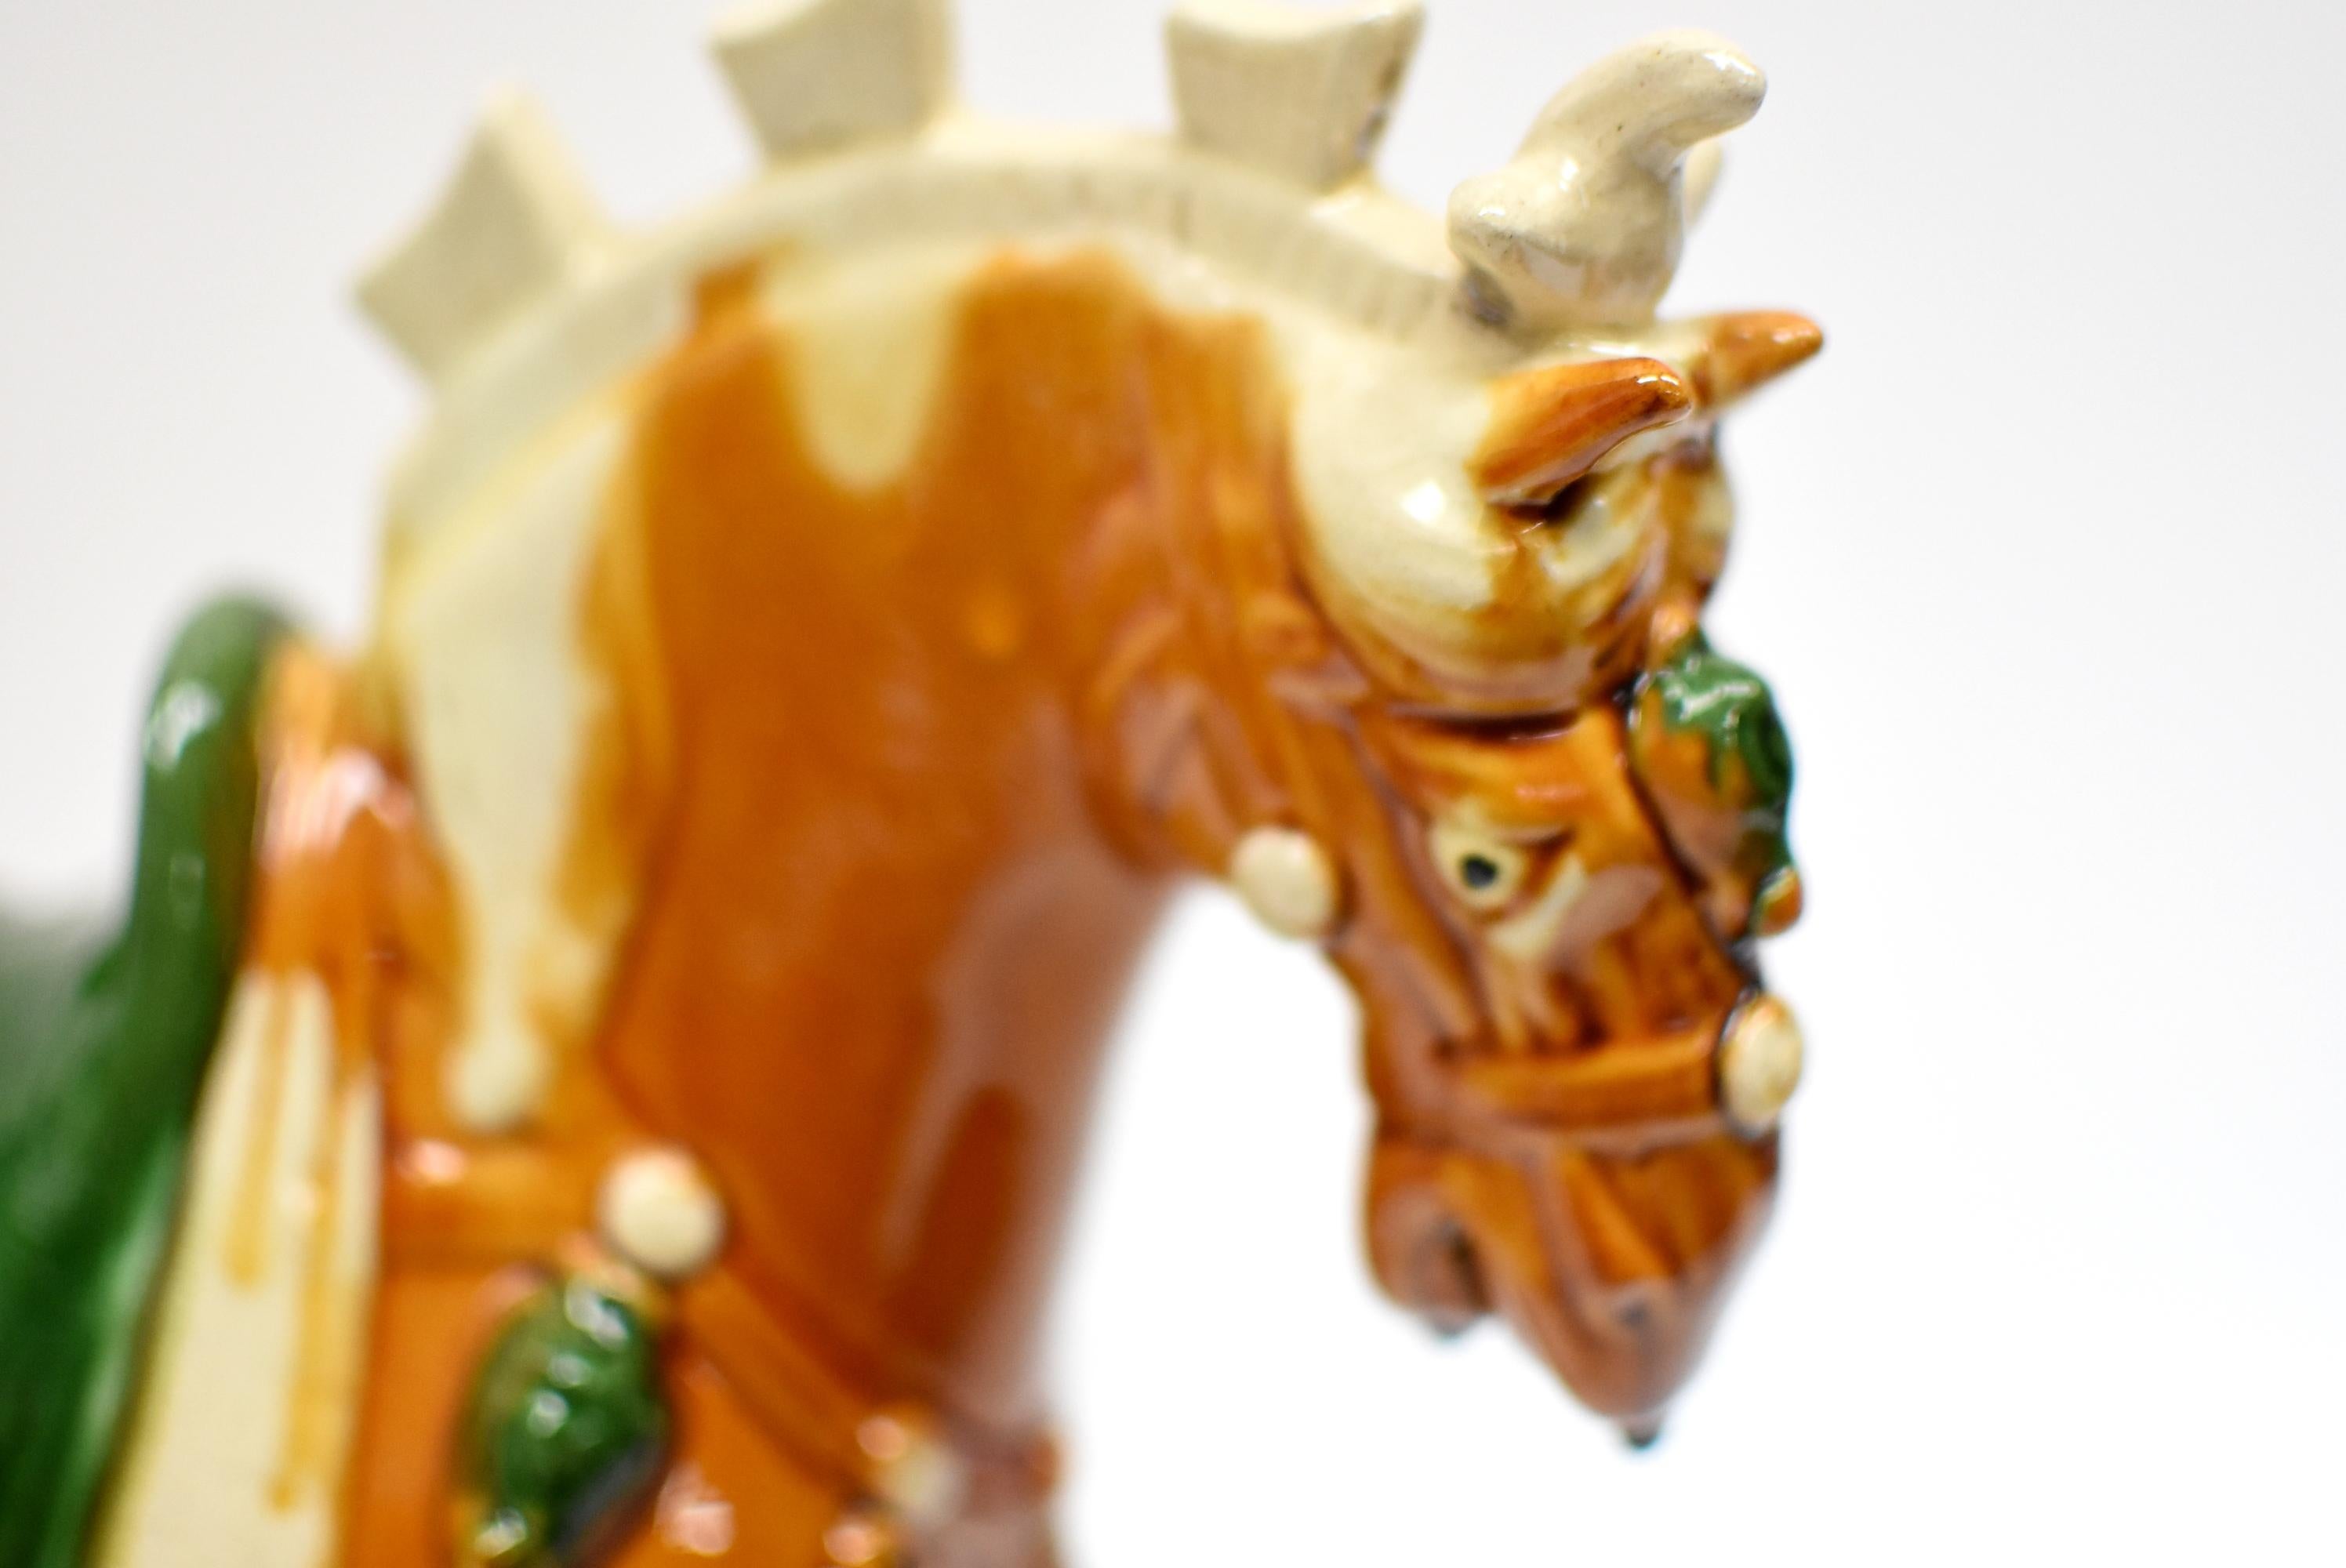 A beautiful caramel San Cai horse in high gloss. The Sancai technique dates back to the Tang dynasty (618–907AD). It produces highly artistic, refined sculptures with brilliant colors and glazes. This horse has well defined muscles and calm